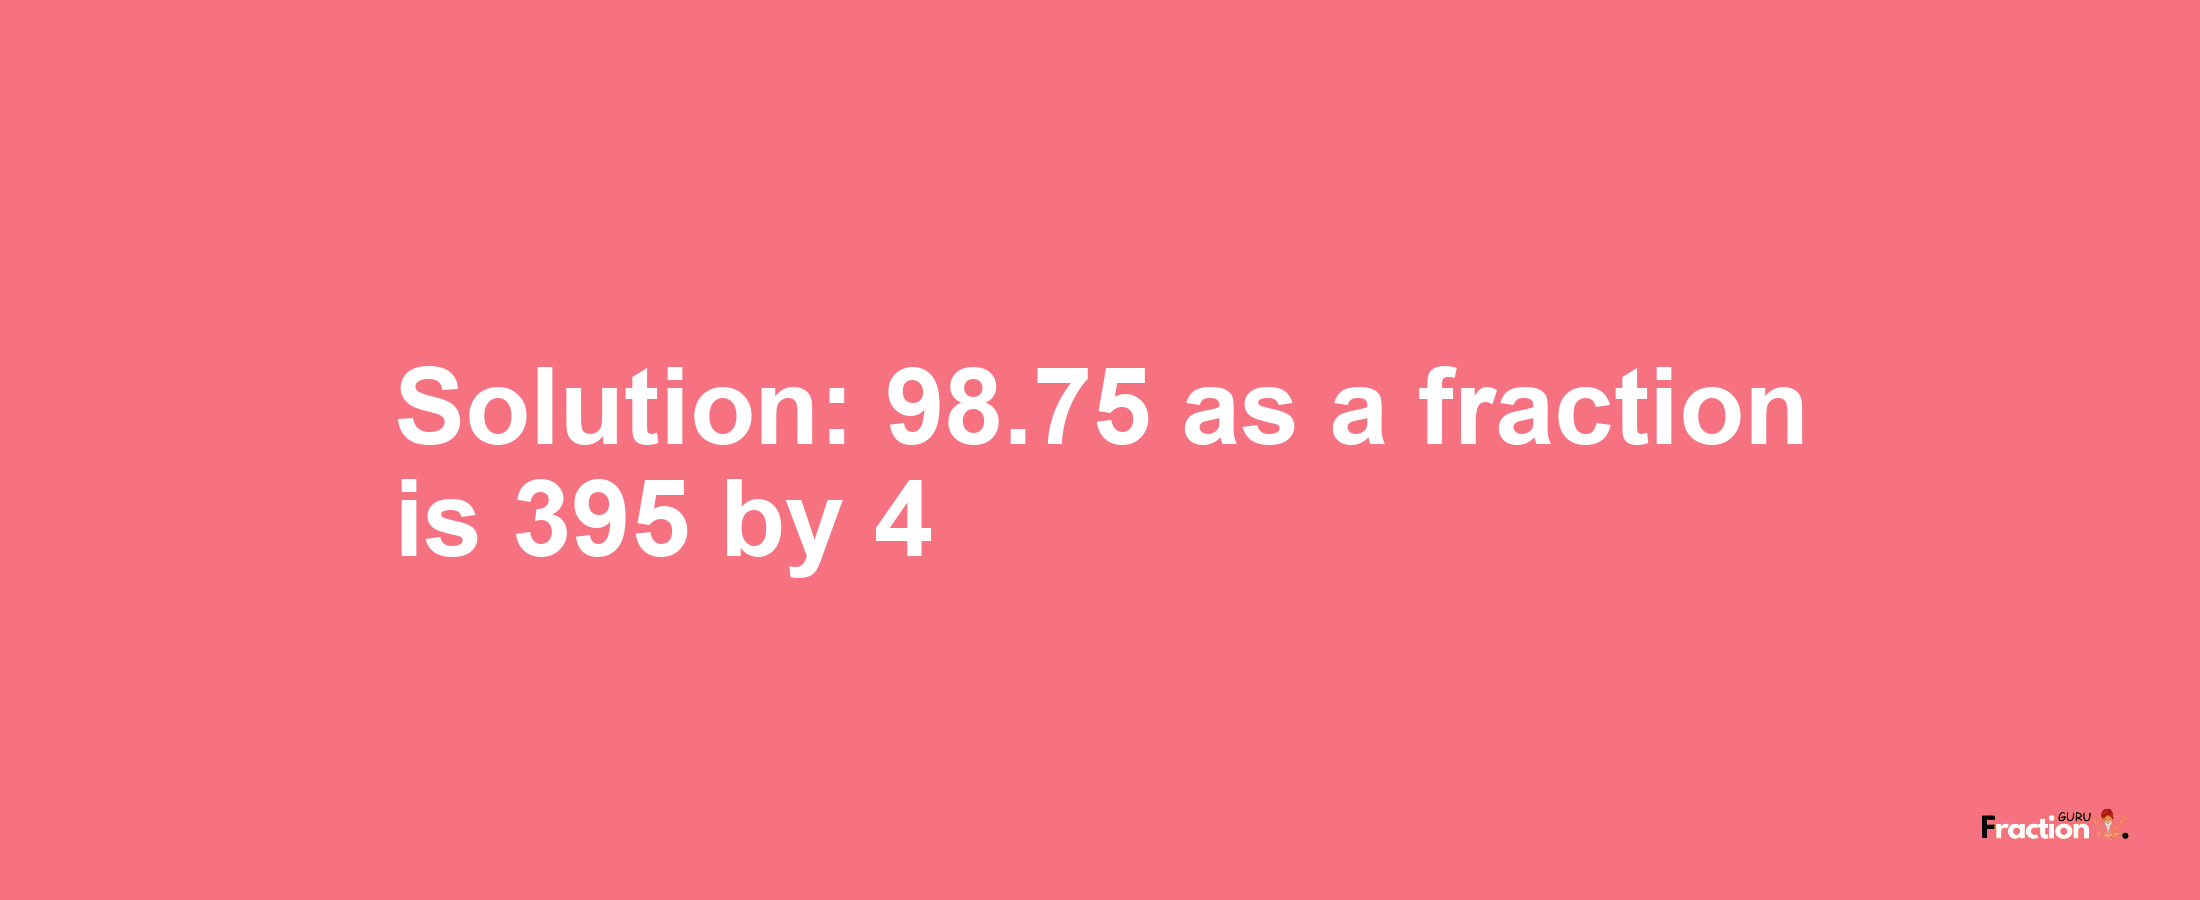 Solution:98.75 as a fraction is 395/4